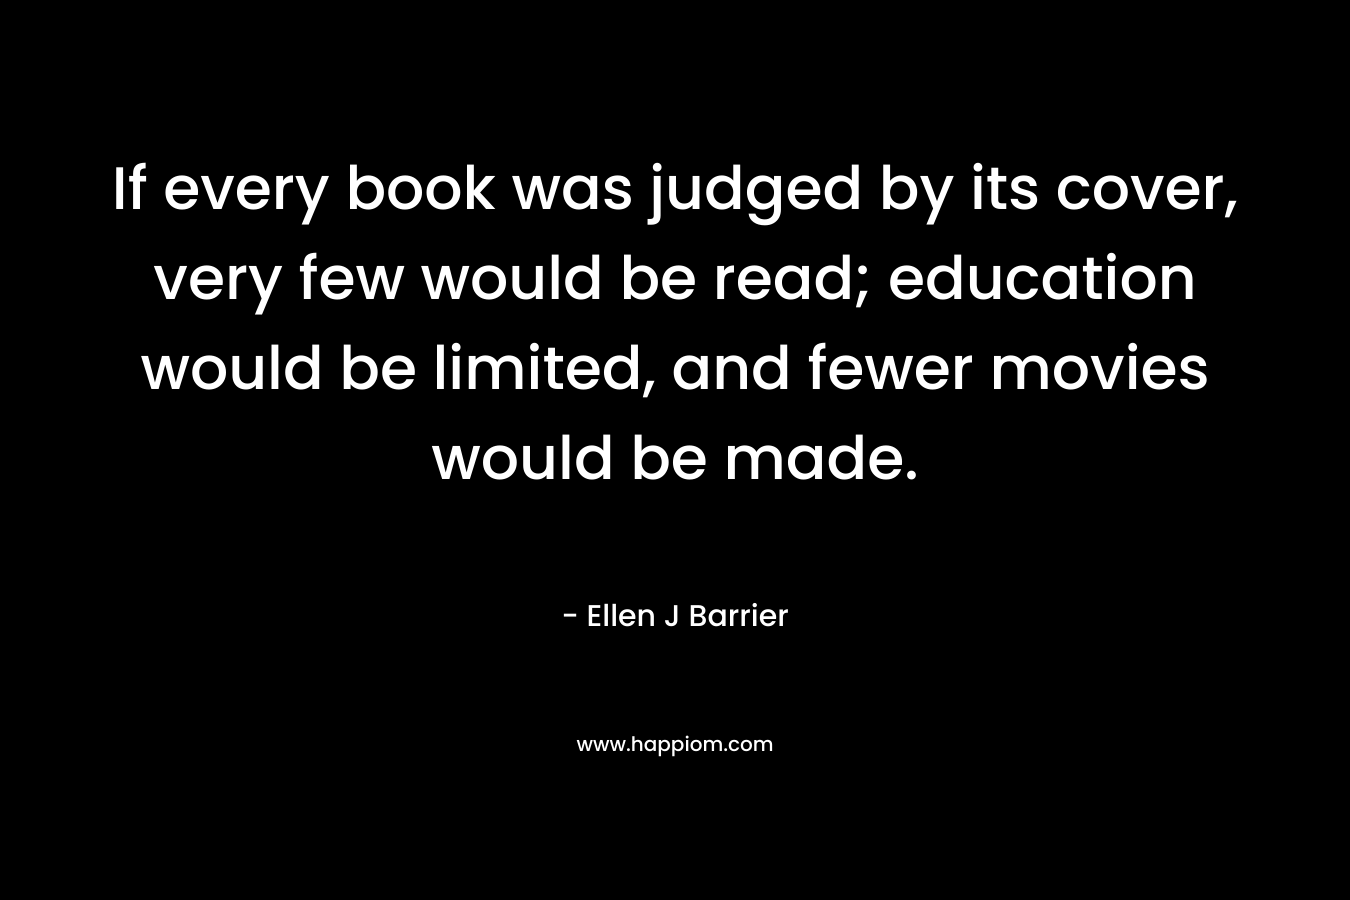 If every book was judged by its cover, very few would be read; education would be limited, and fewer movies would be made.